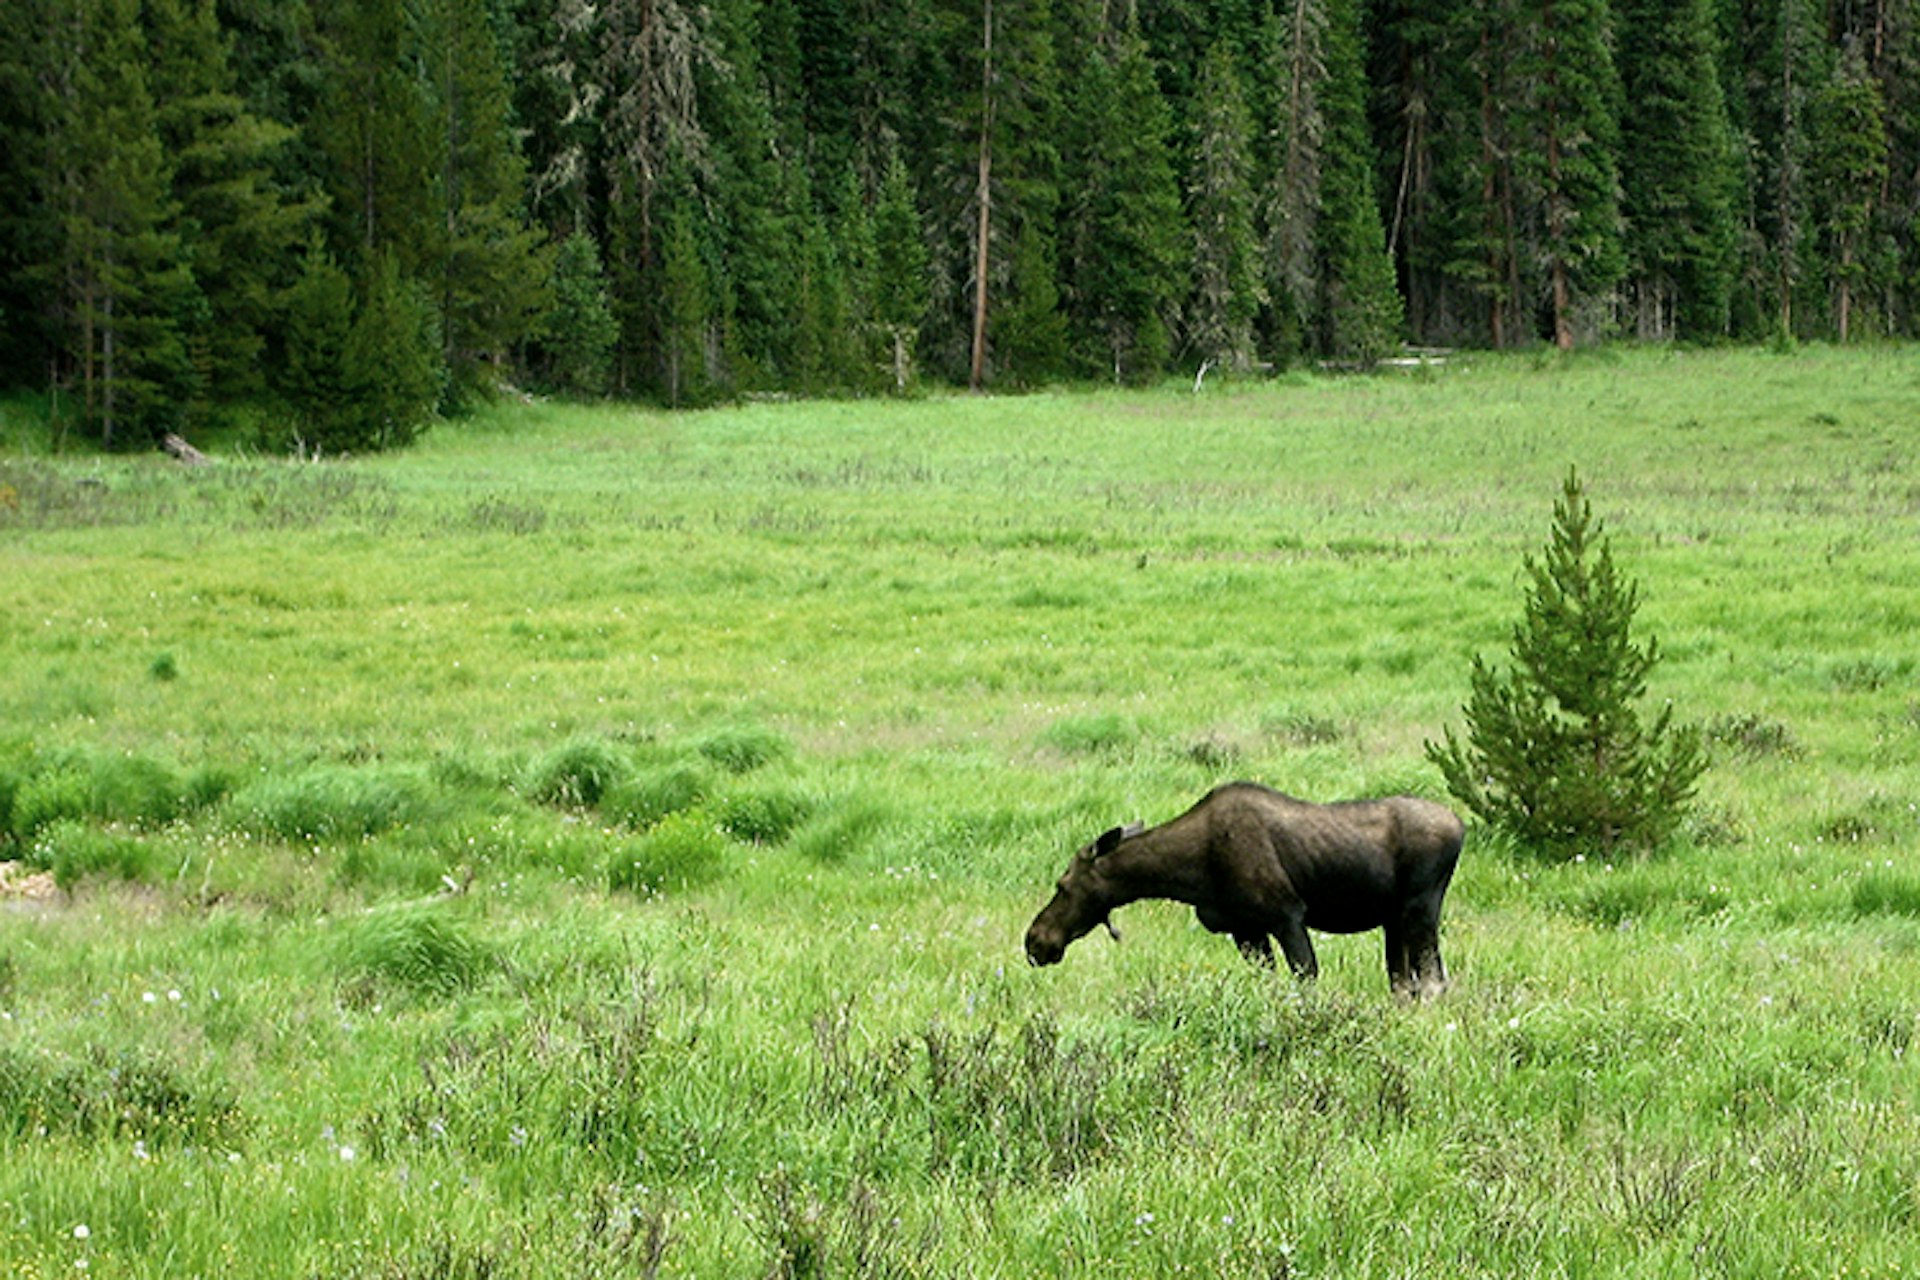 Moose like to hang out in meadows or wetlands where aquatic vegetation can be found. Image by Brian & Jaclyn Drum / CC BY 2.0